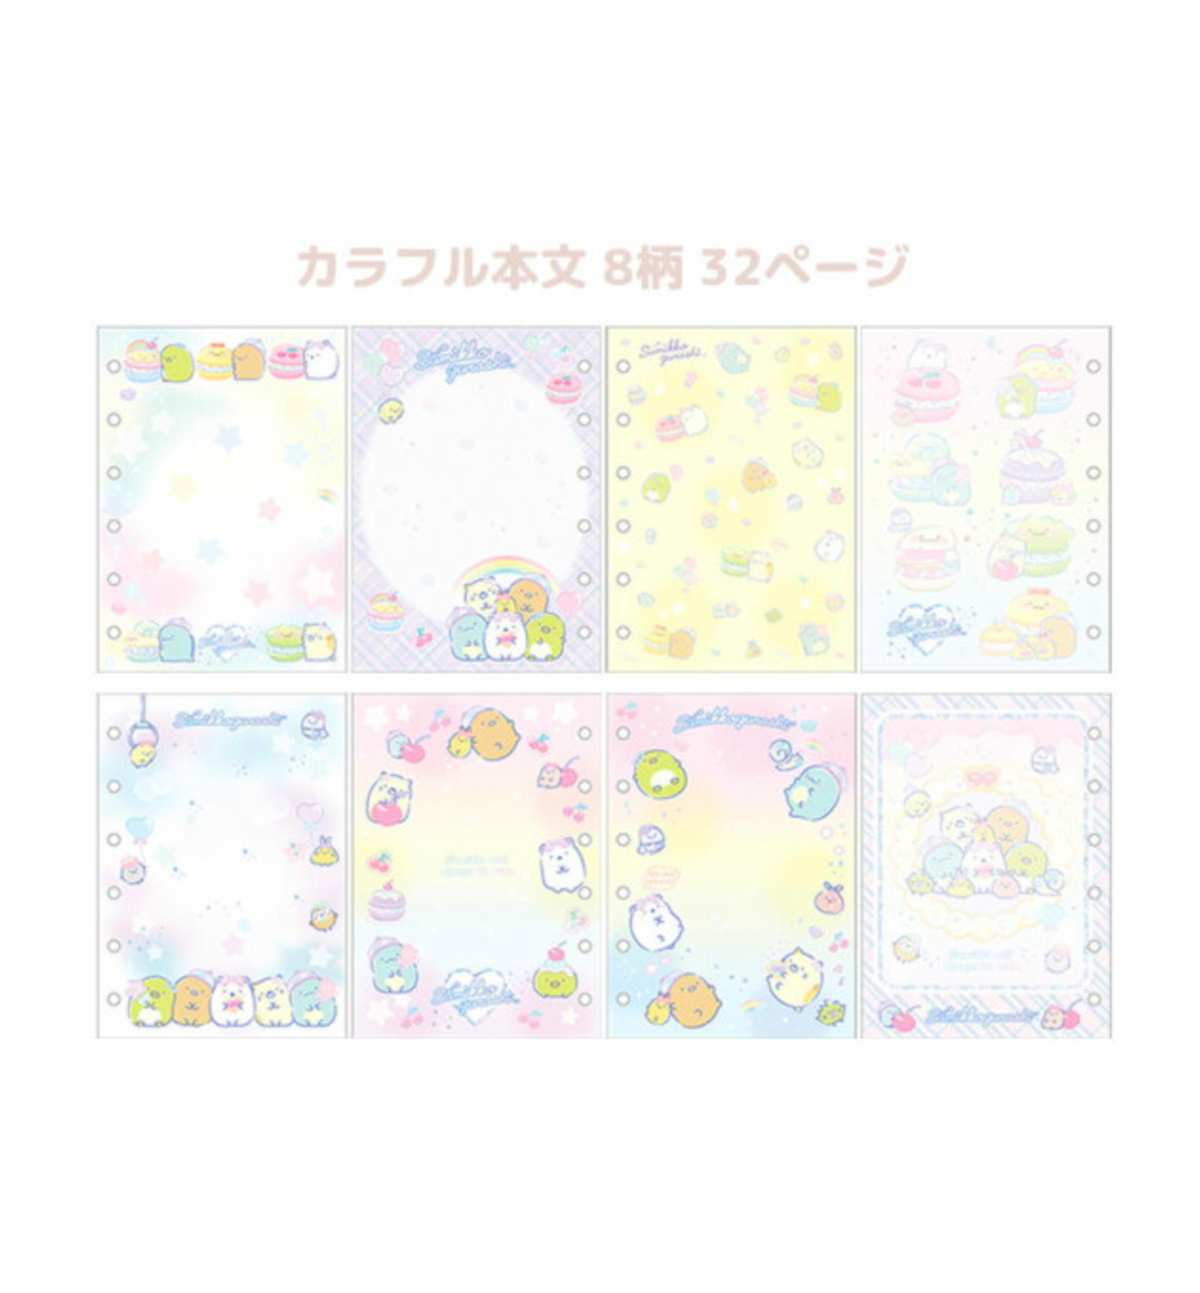 Sumikko Gurashi Sticker Collecting Pages [Sweets]